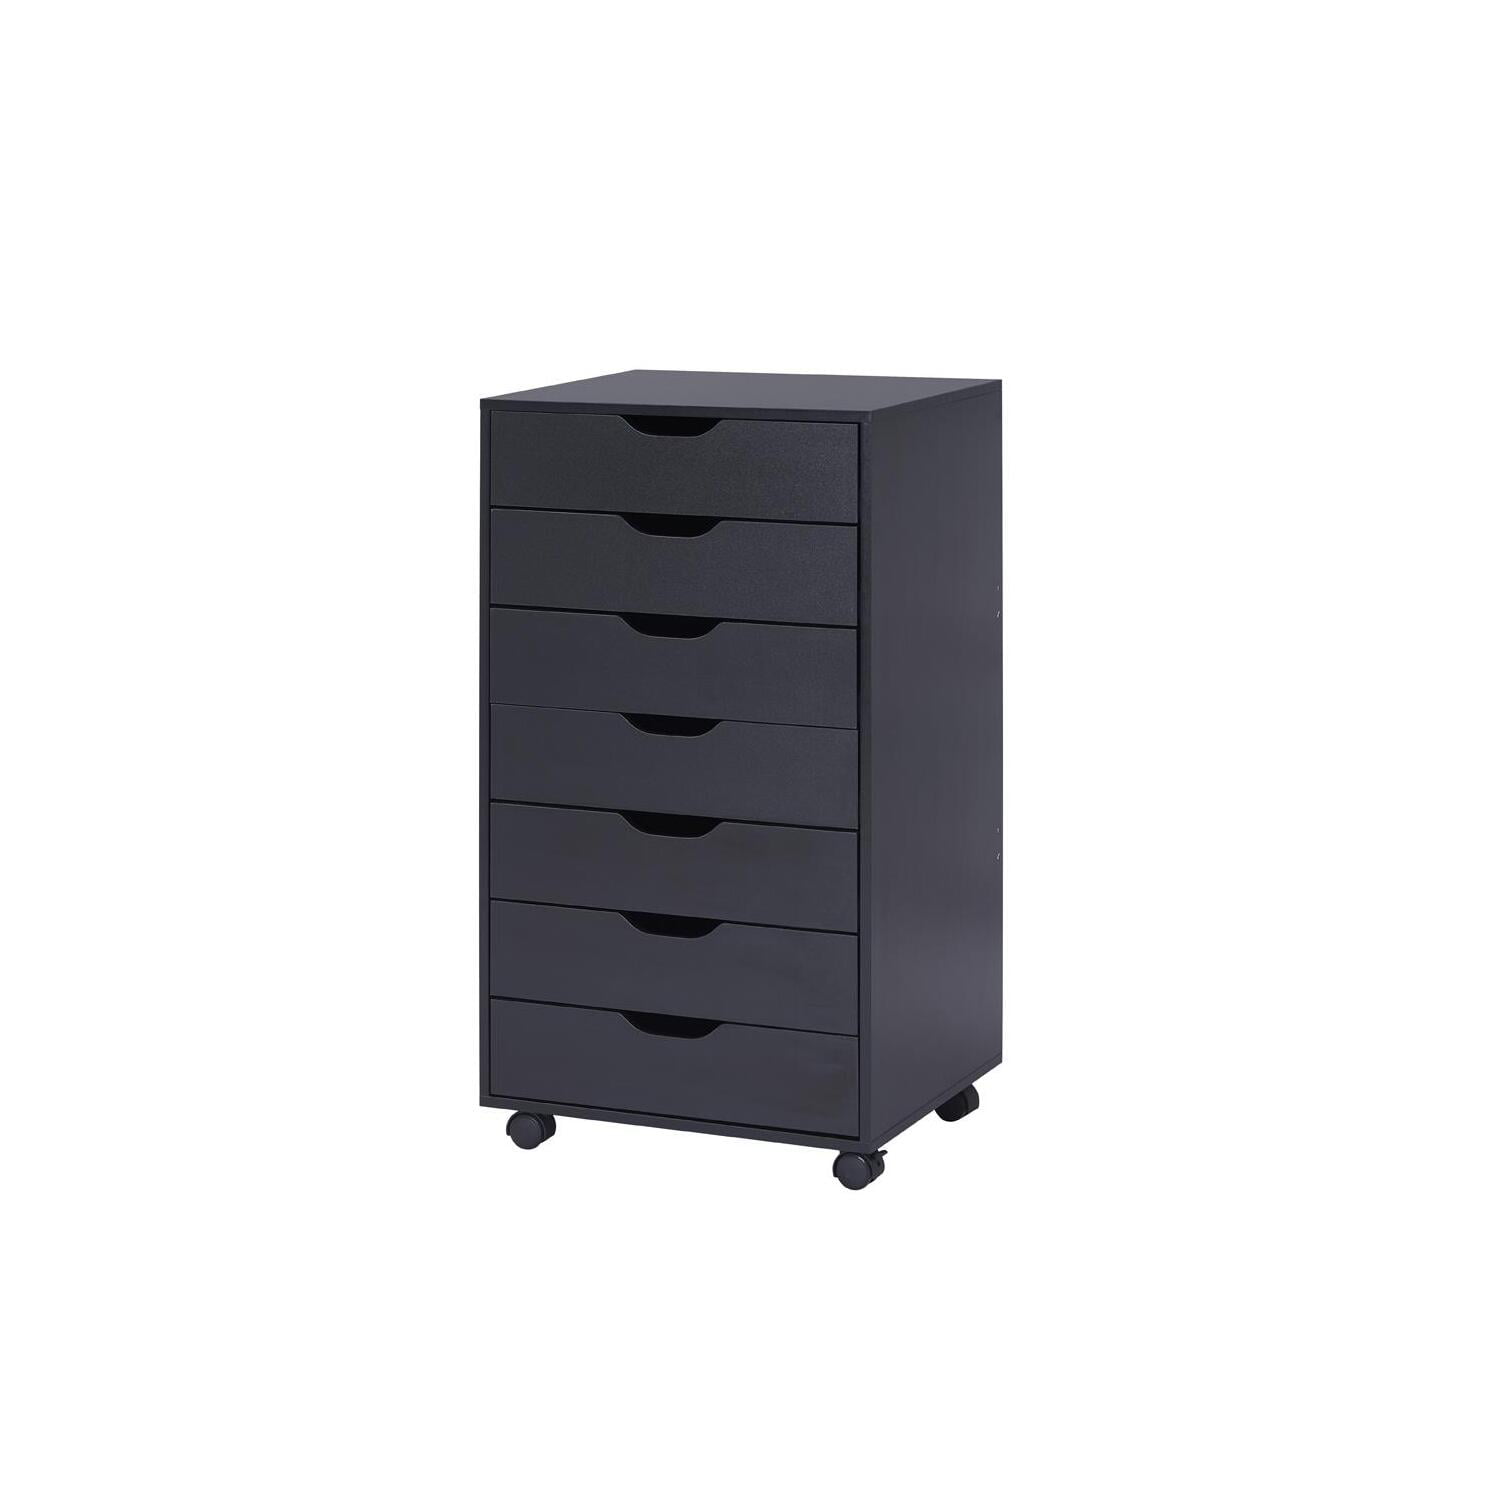 Aoibox 7-Drawers Black Storage Cabinet, Tall Chest of Drawers for Makeup, Closet, Bedroom 34.5 in. H x 18.9 in. x W 15.7 in. D